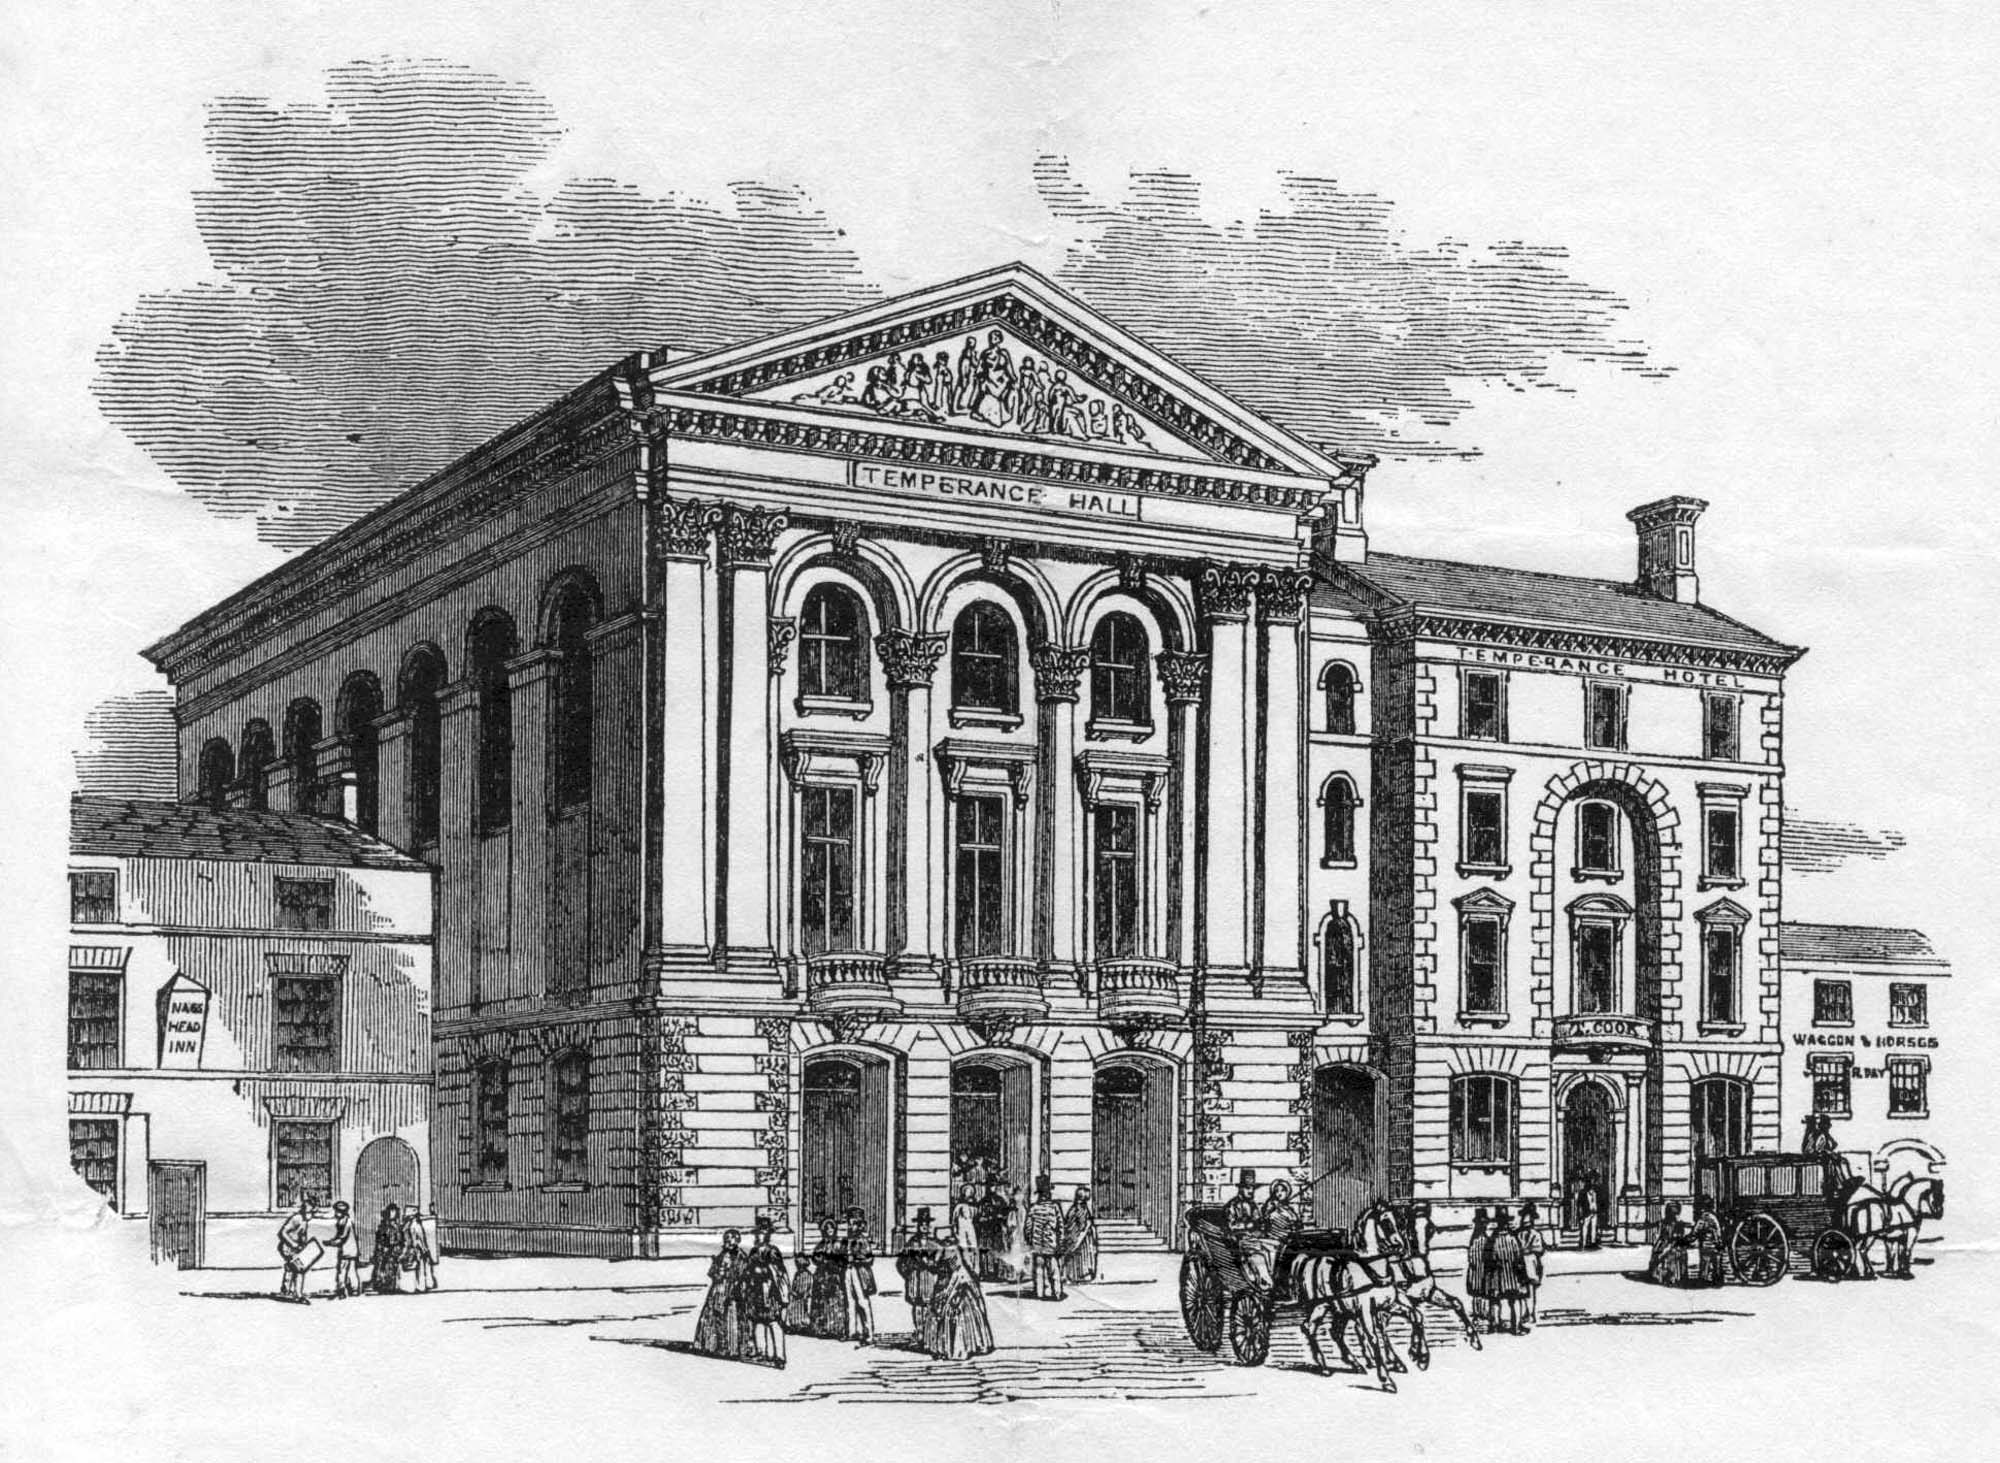 An etching of the Temperance Hotel and Hall - Thomas Cook Archives